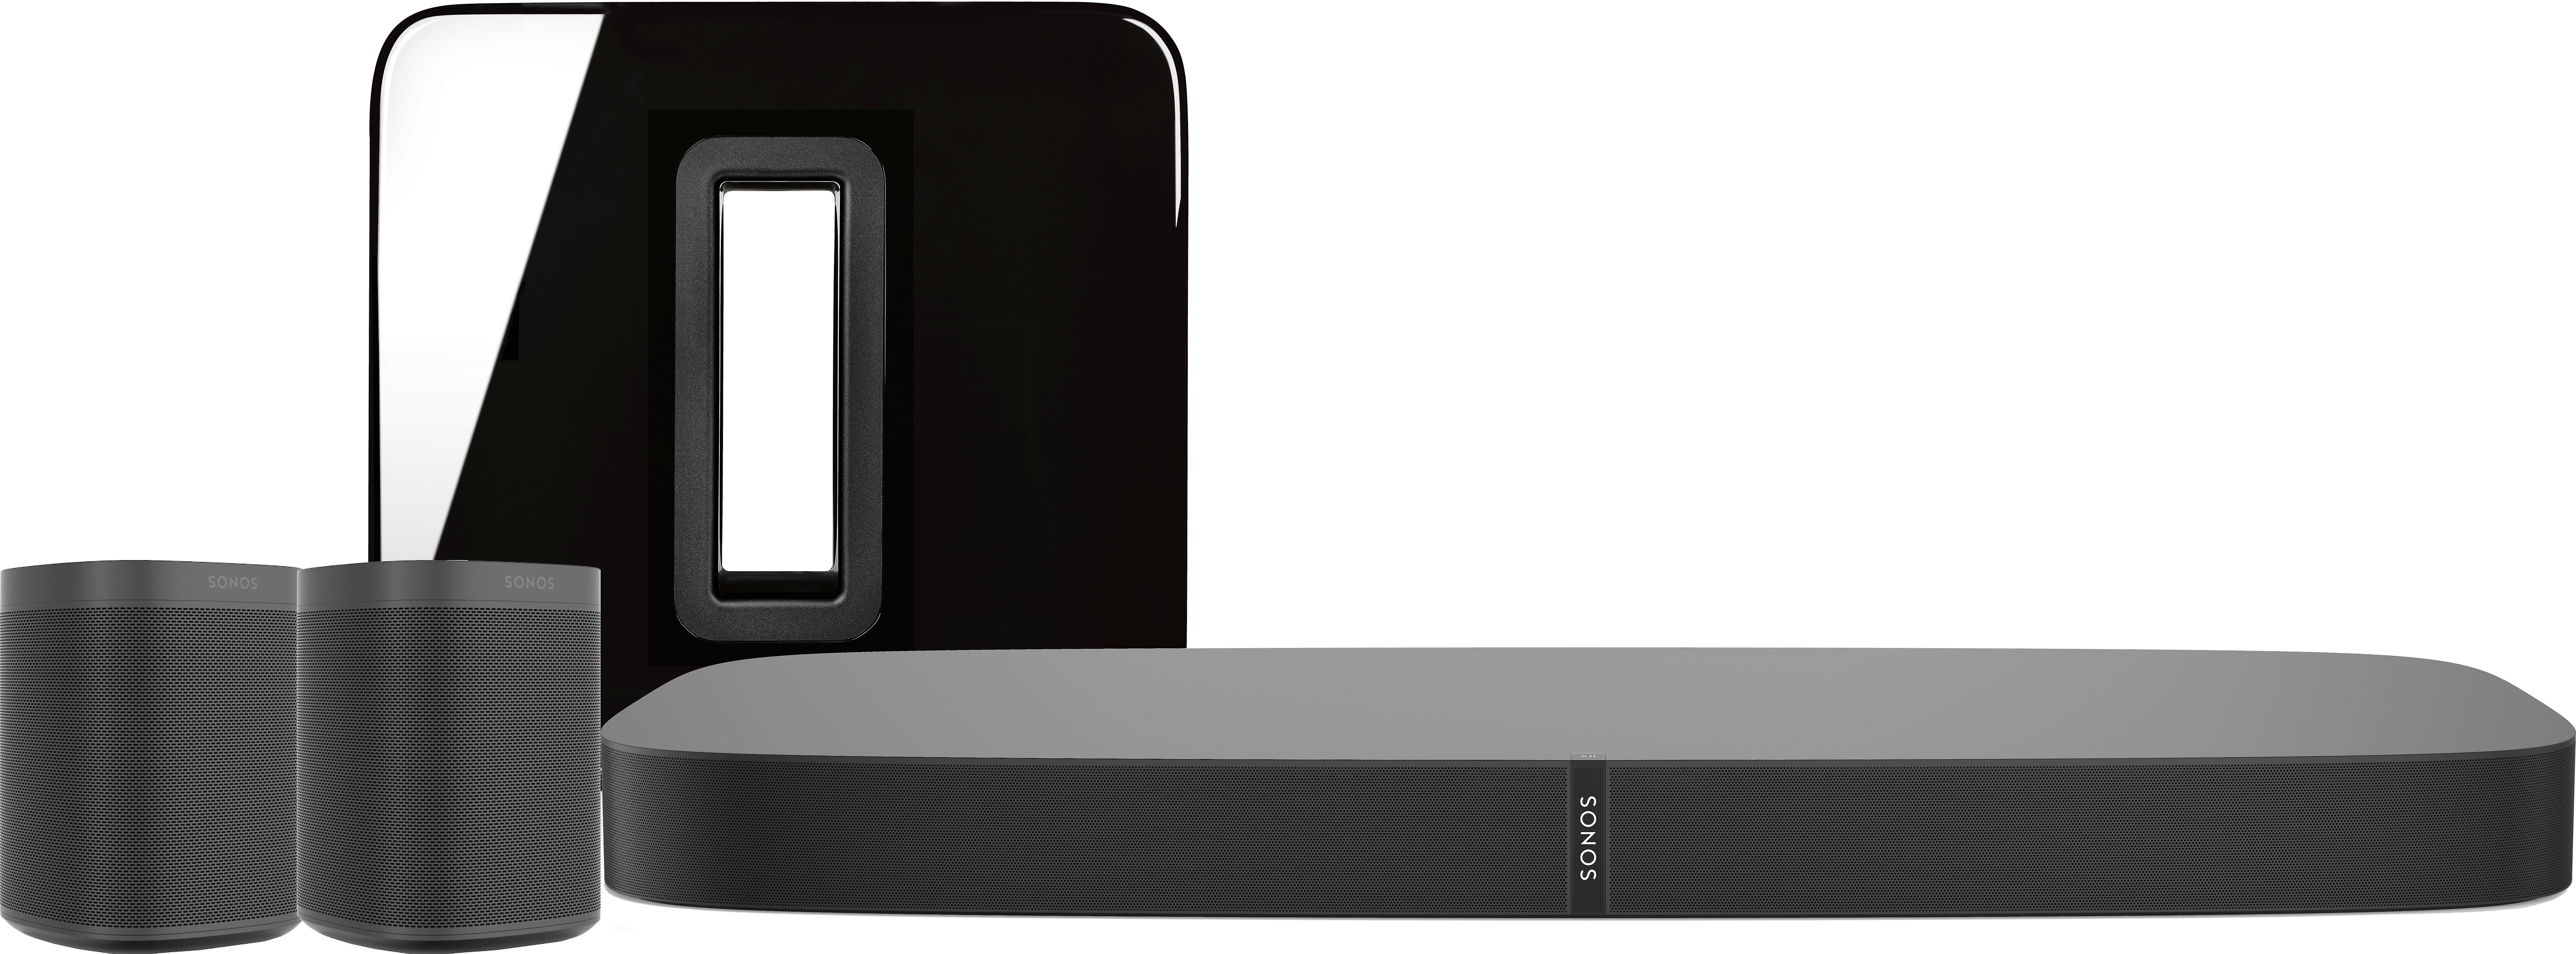 Sonos Playbase 5.1 Home Theater System 